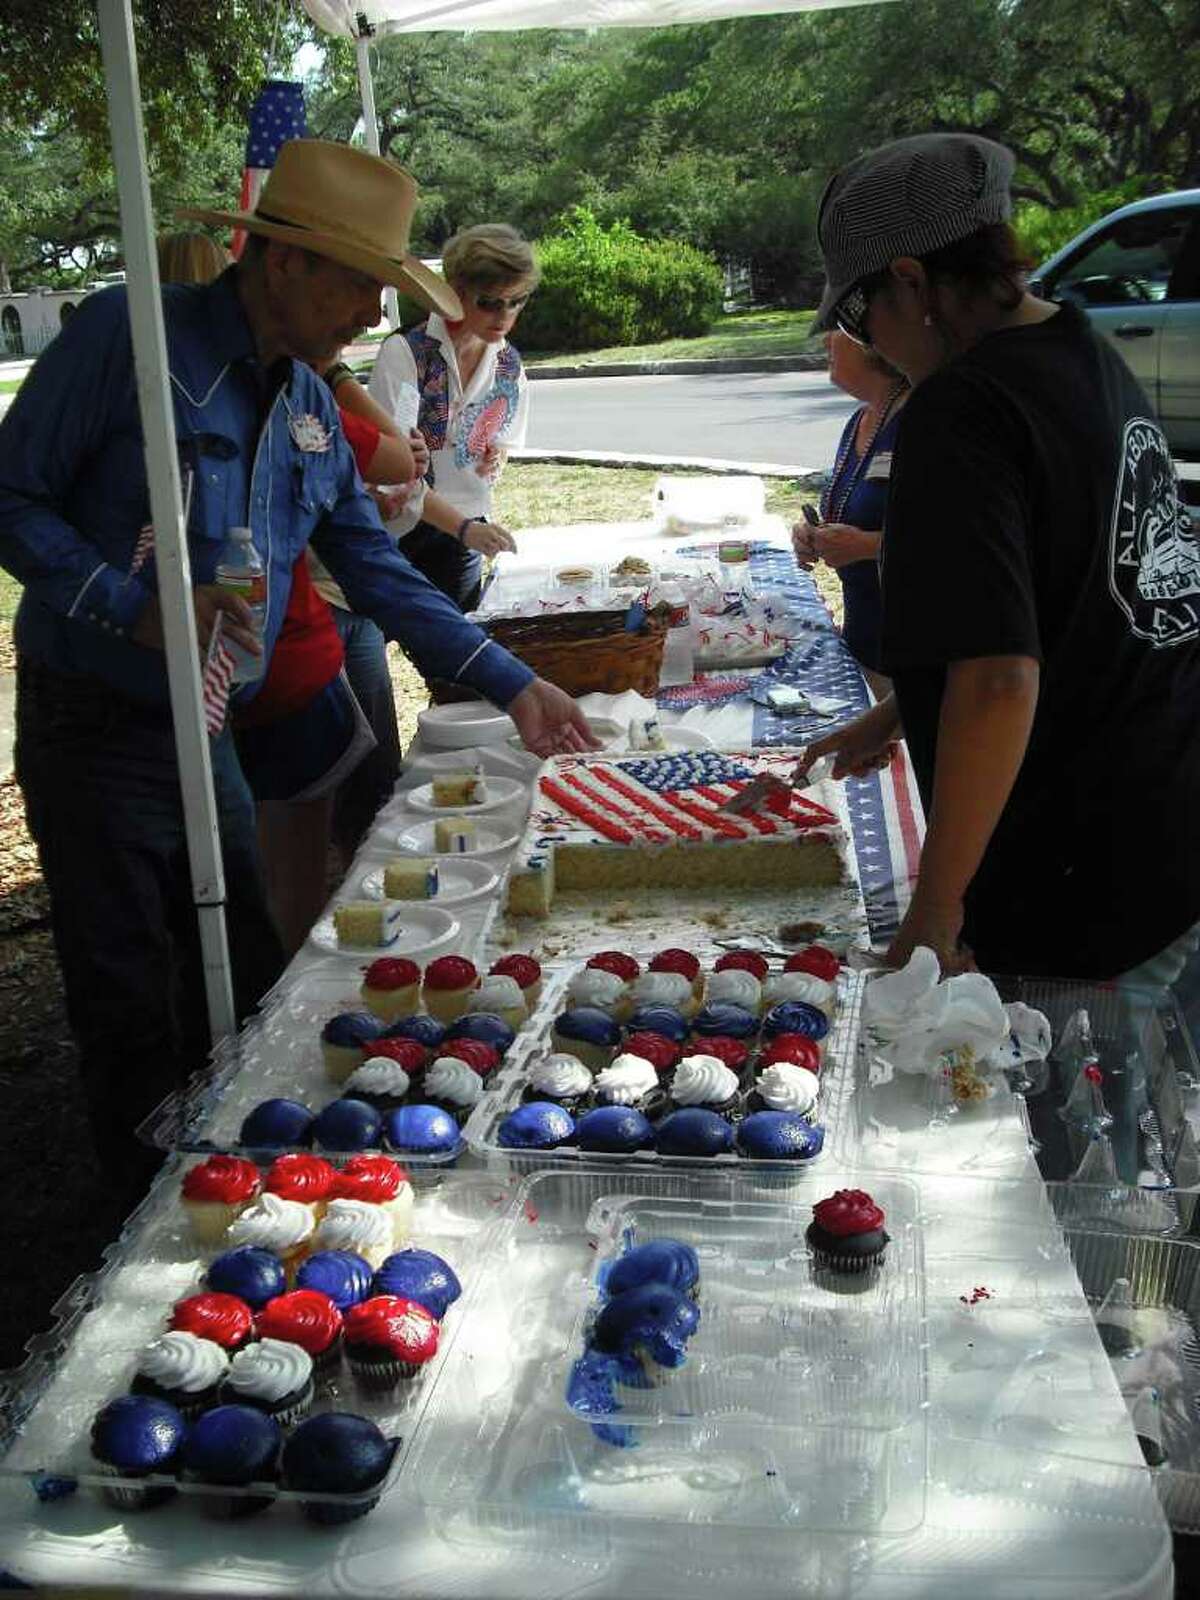 Olmos Park residents, including Mayor Susan Gragg (left background) browse patriotic treats at the city’s Fourth of July picnic Monday at Alameda Circle. The food pictured here were offered by Frankie Boone of Converse-based FrankieB Bakery & Catering (right background) and Olmos Park-based Sylvia Toscano of All Aboard Deli and Bistro (right forefront).